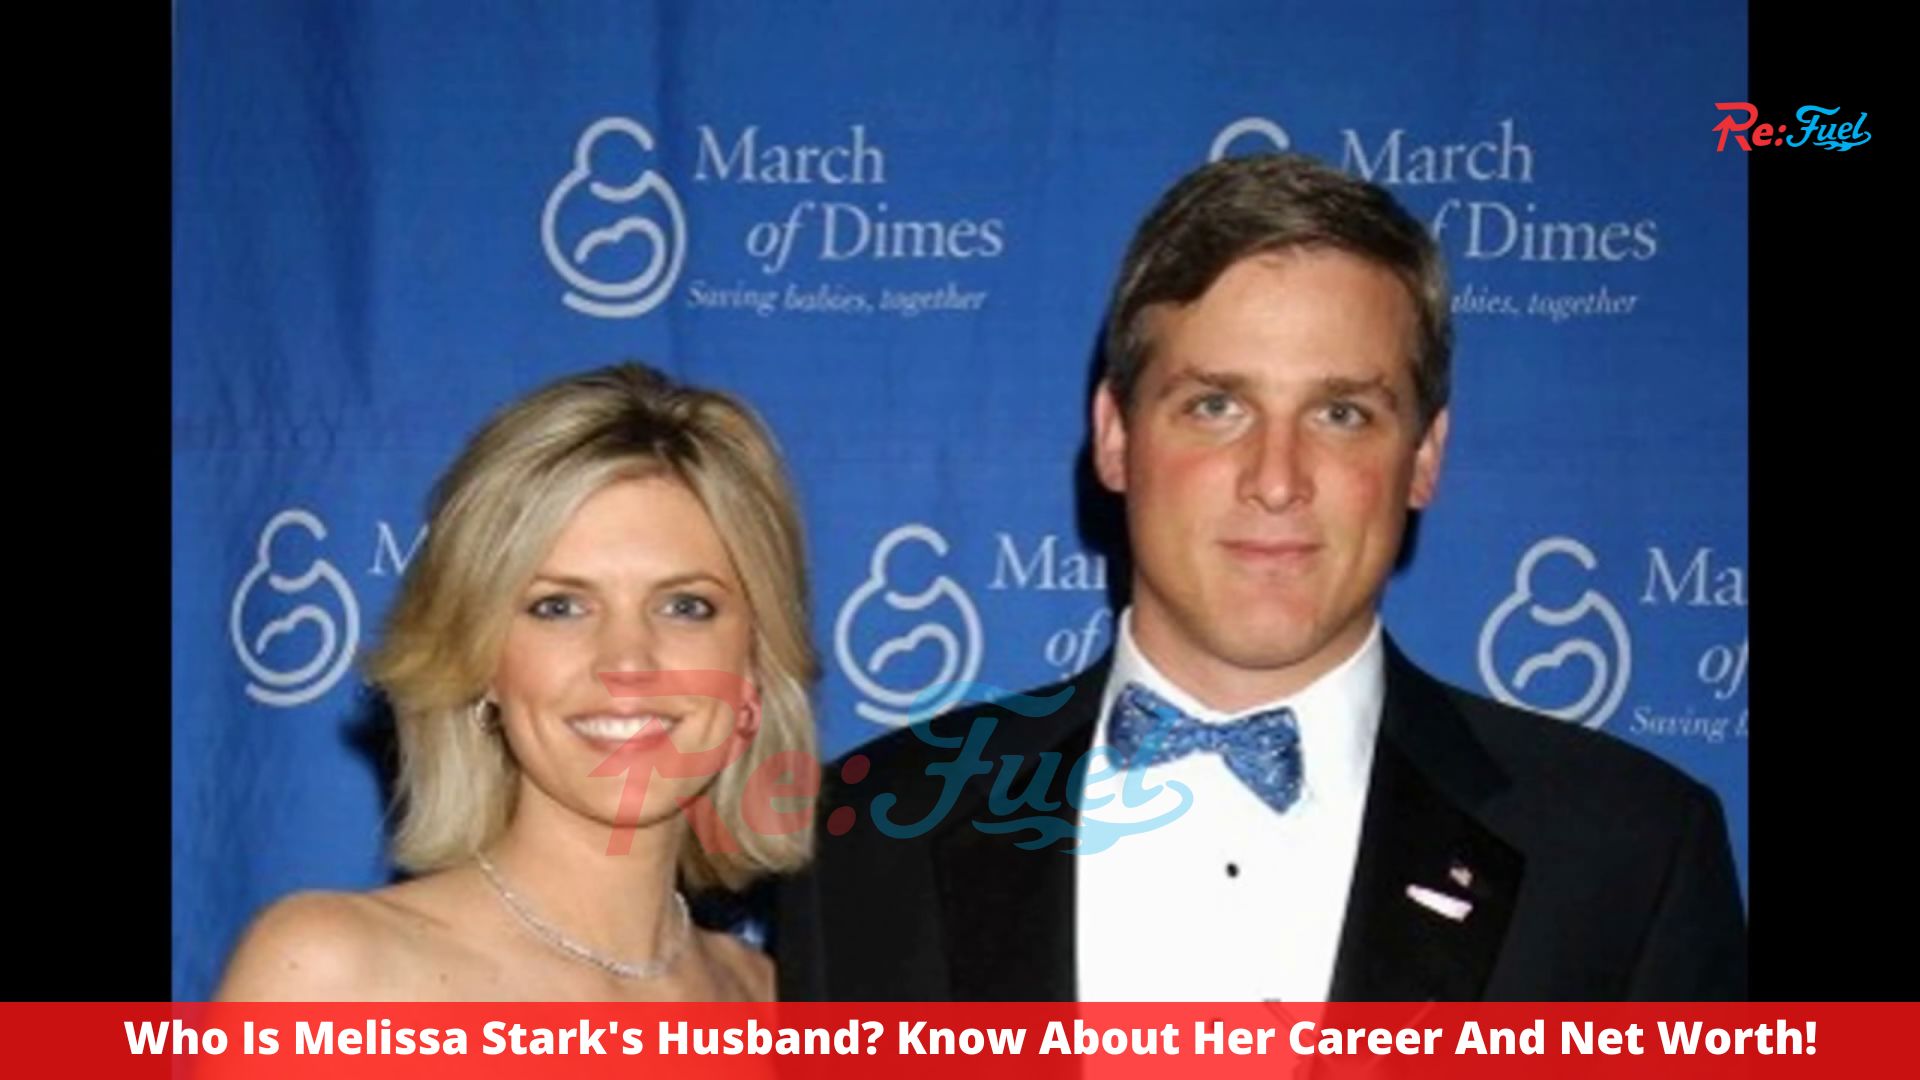 Who Is Melissa Stark's Husband? Know About Her Career And Net Worth!